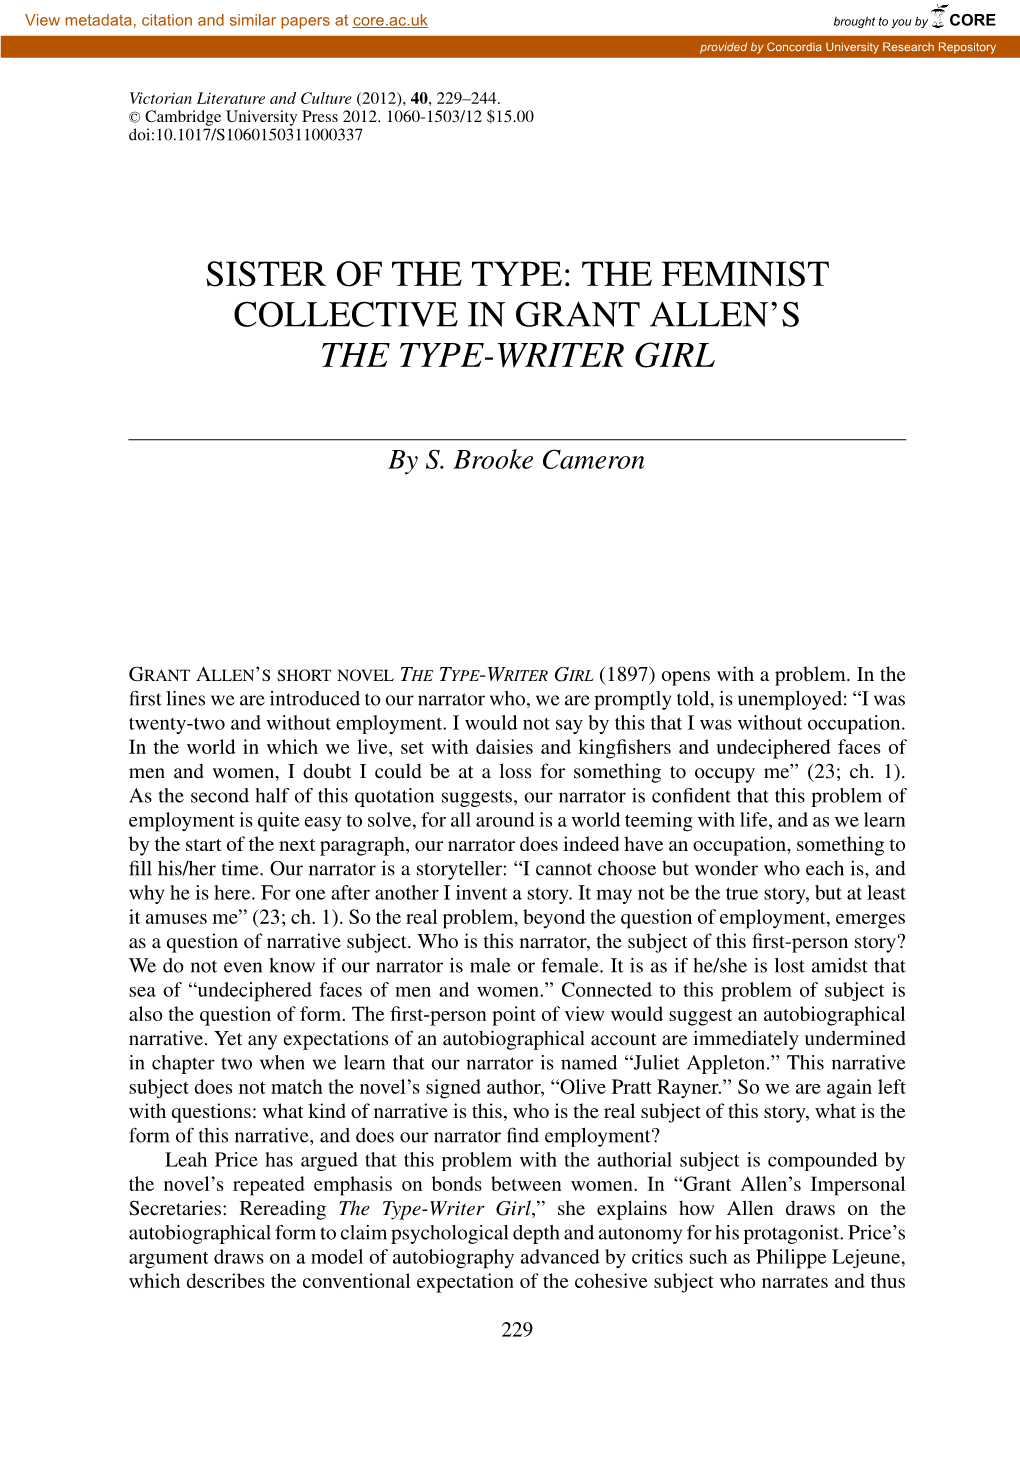 The Feminist Collective in Grant Allen's the Type